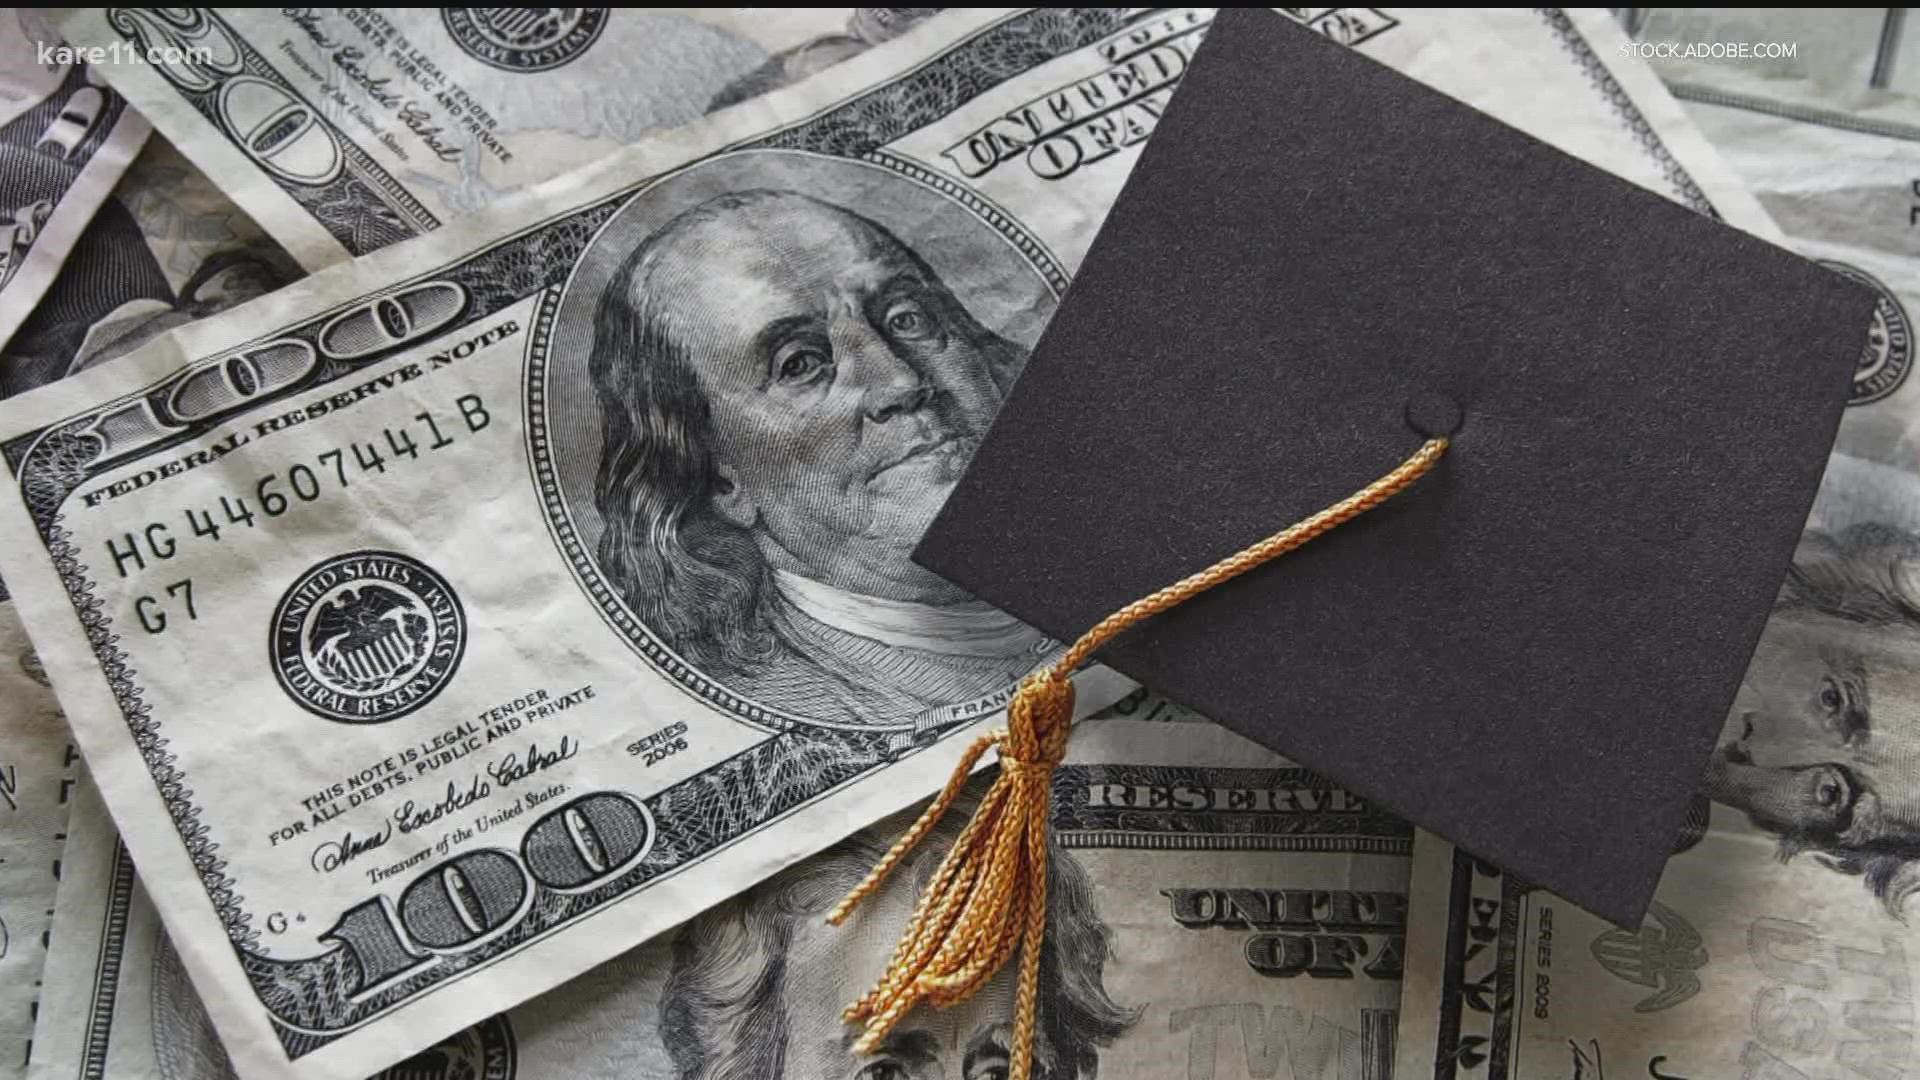 A college degree means a higher salary, but it can also mean student loan debt.